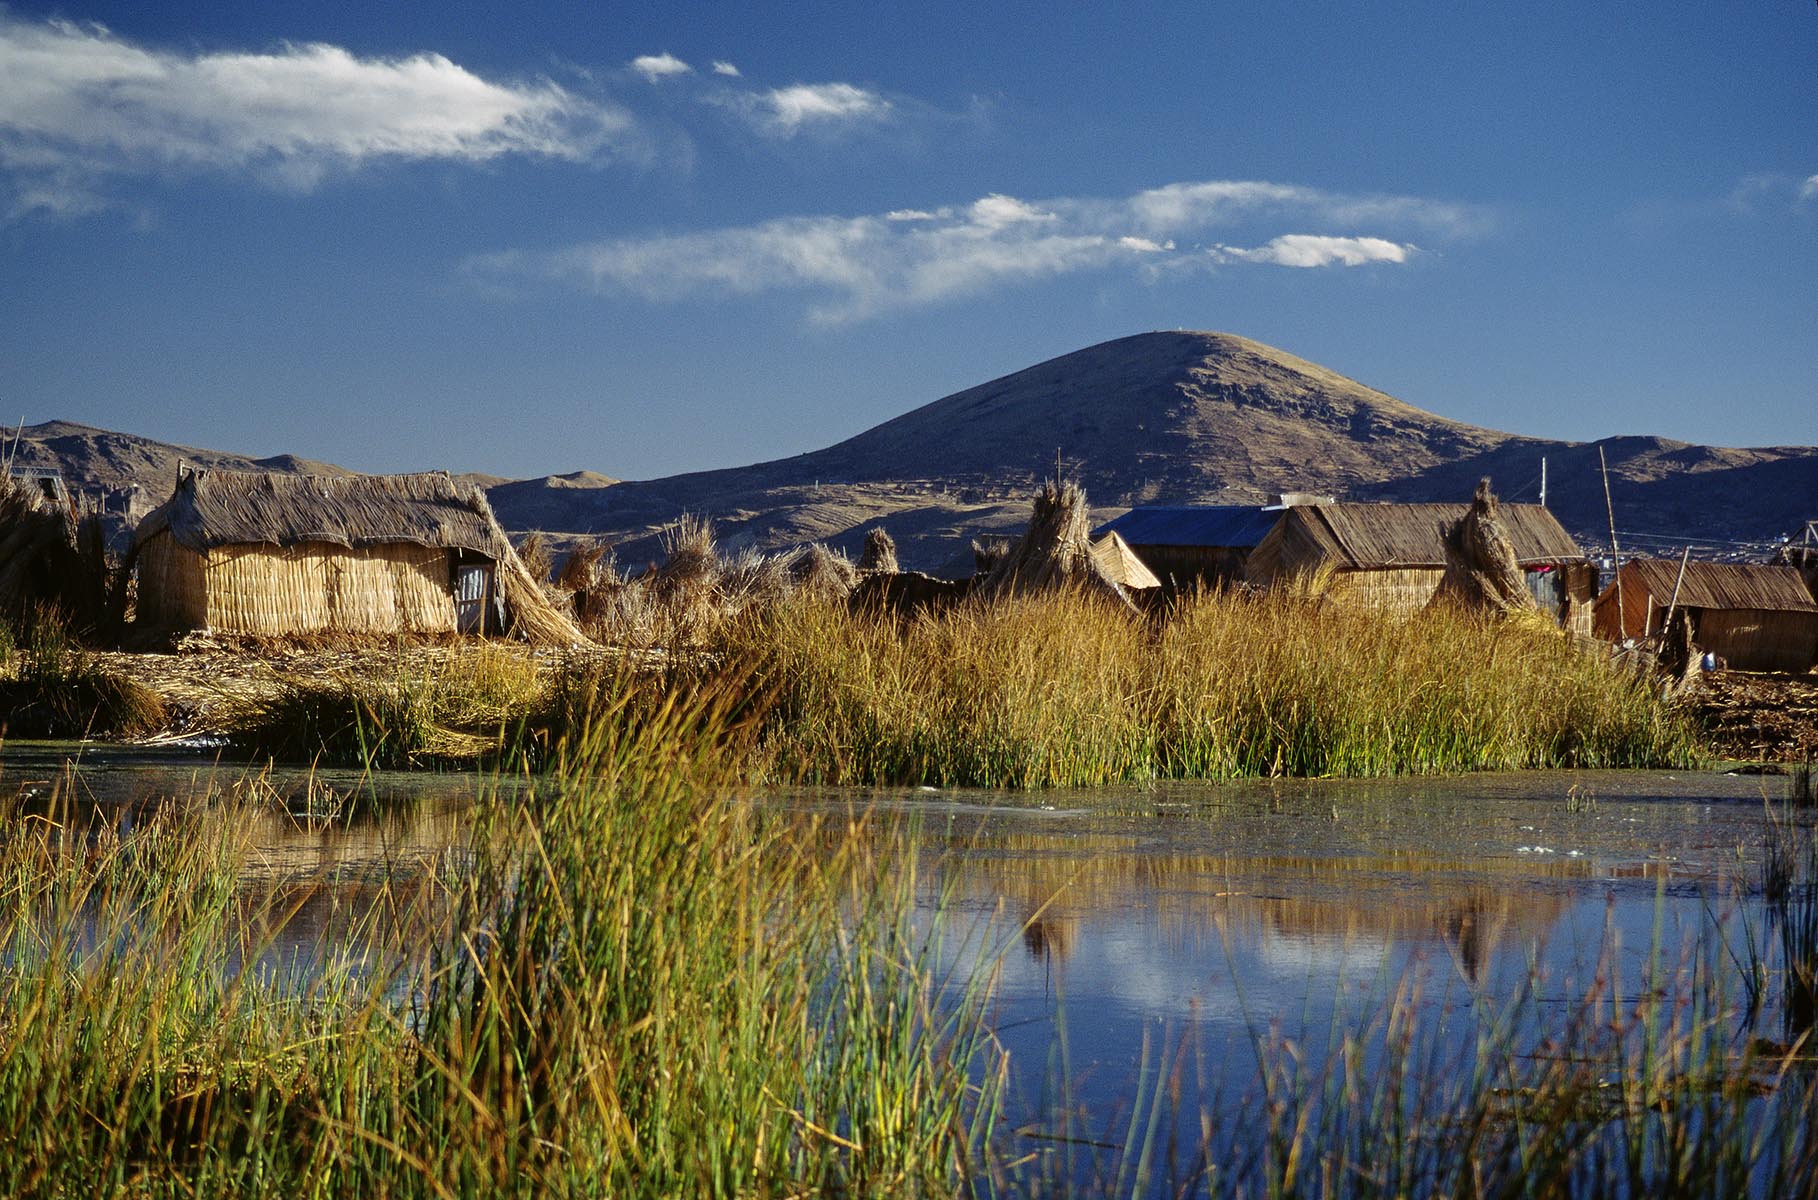 LAKE TITICACA & the FLOATING ISLANDS, which are made entirely of reeds, near PUNO - PERU